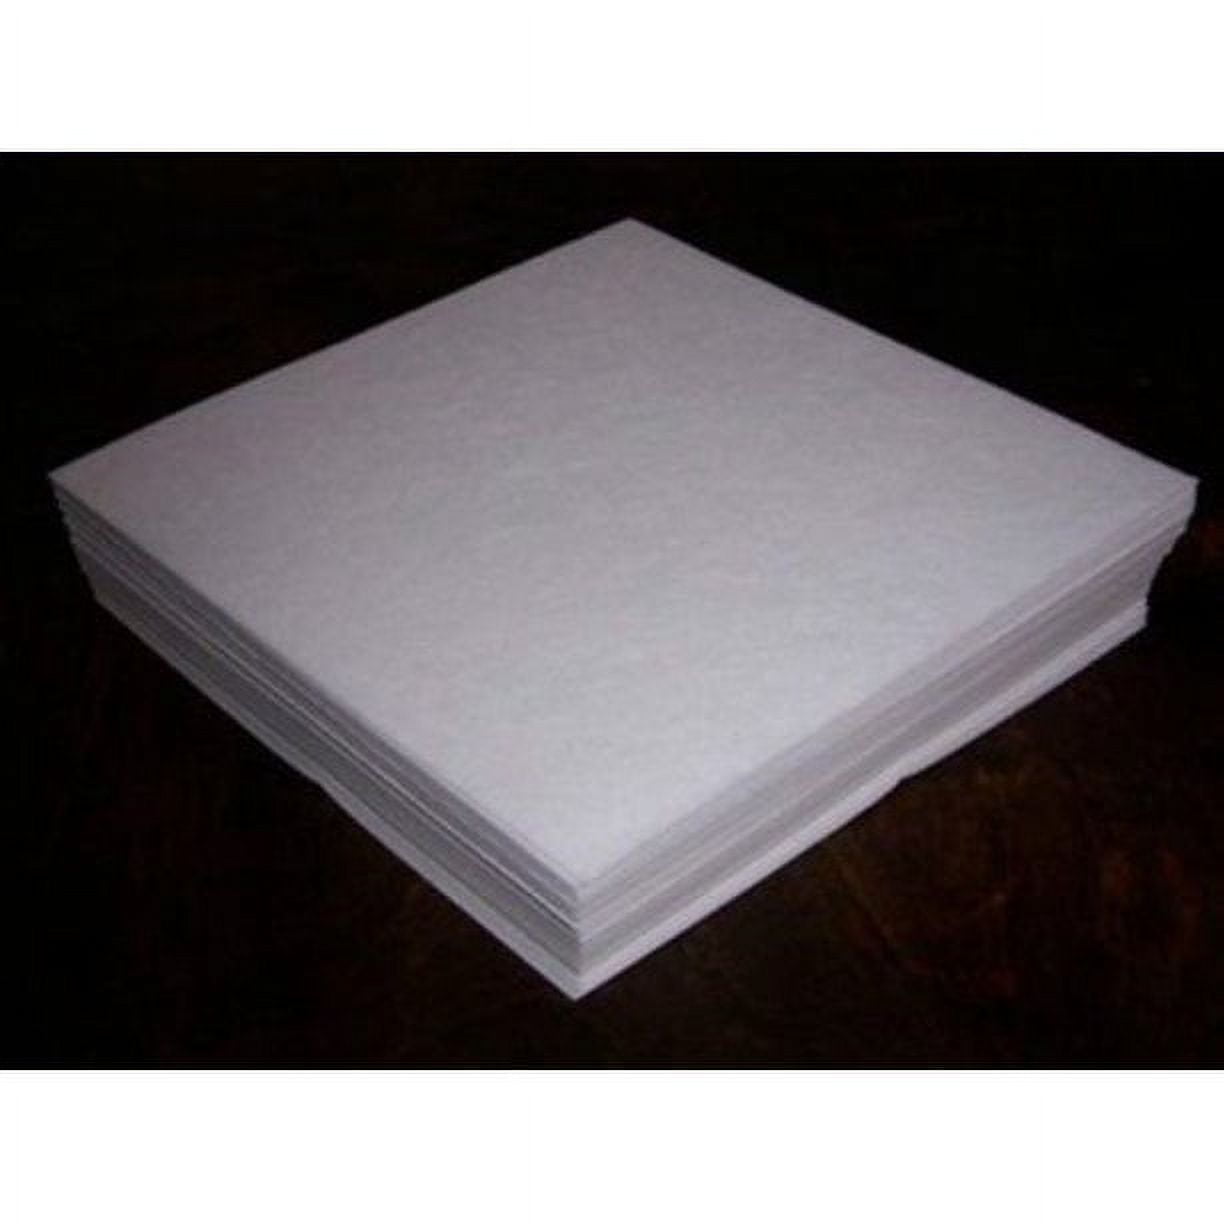 100 Pieces/Pack Water Soluble Embroidery Stabilizer Dissolvable Paper Non